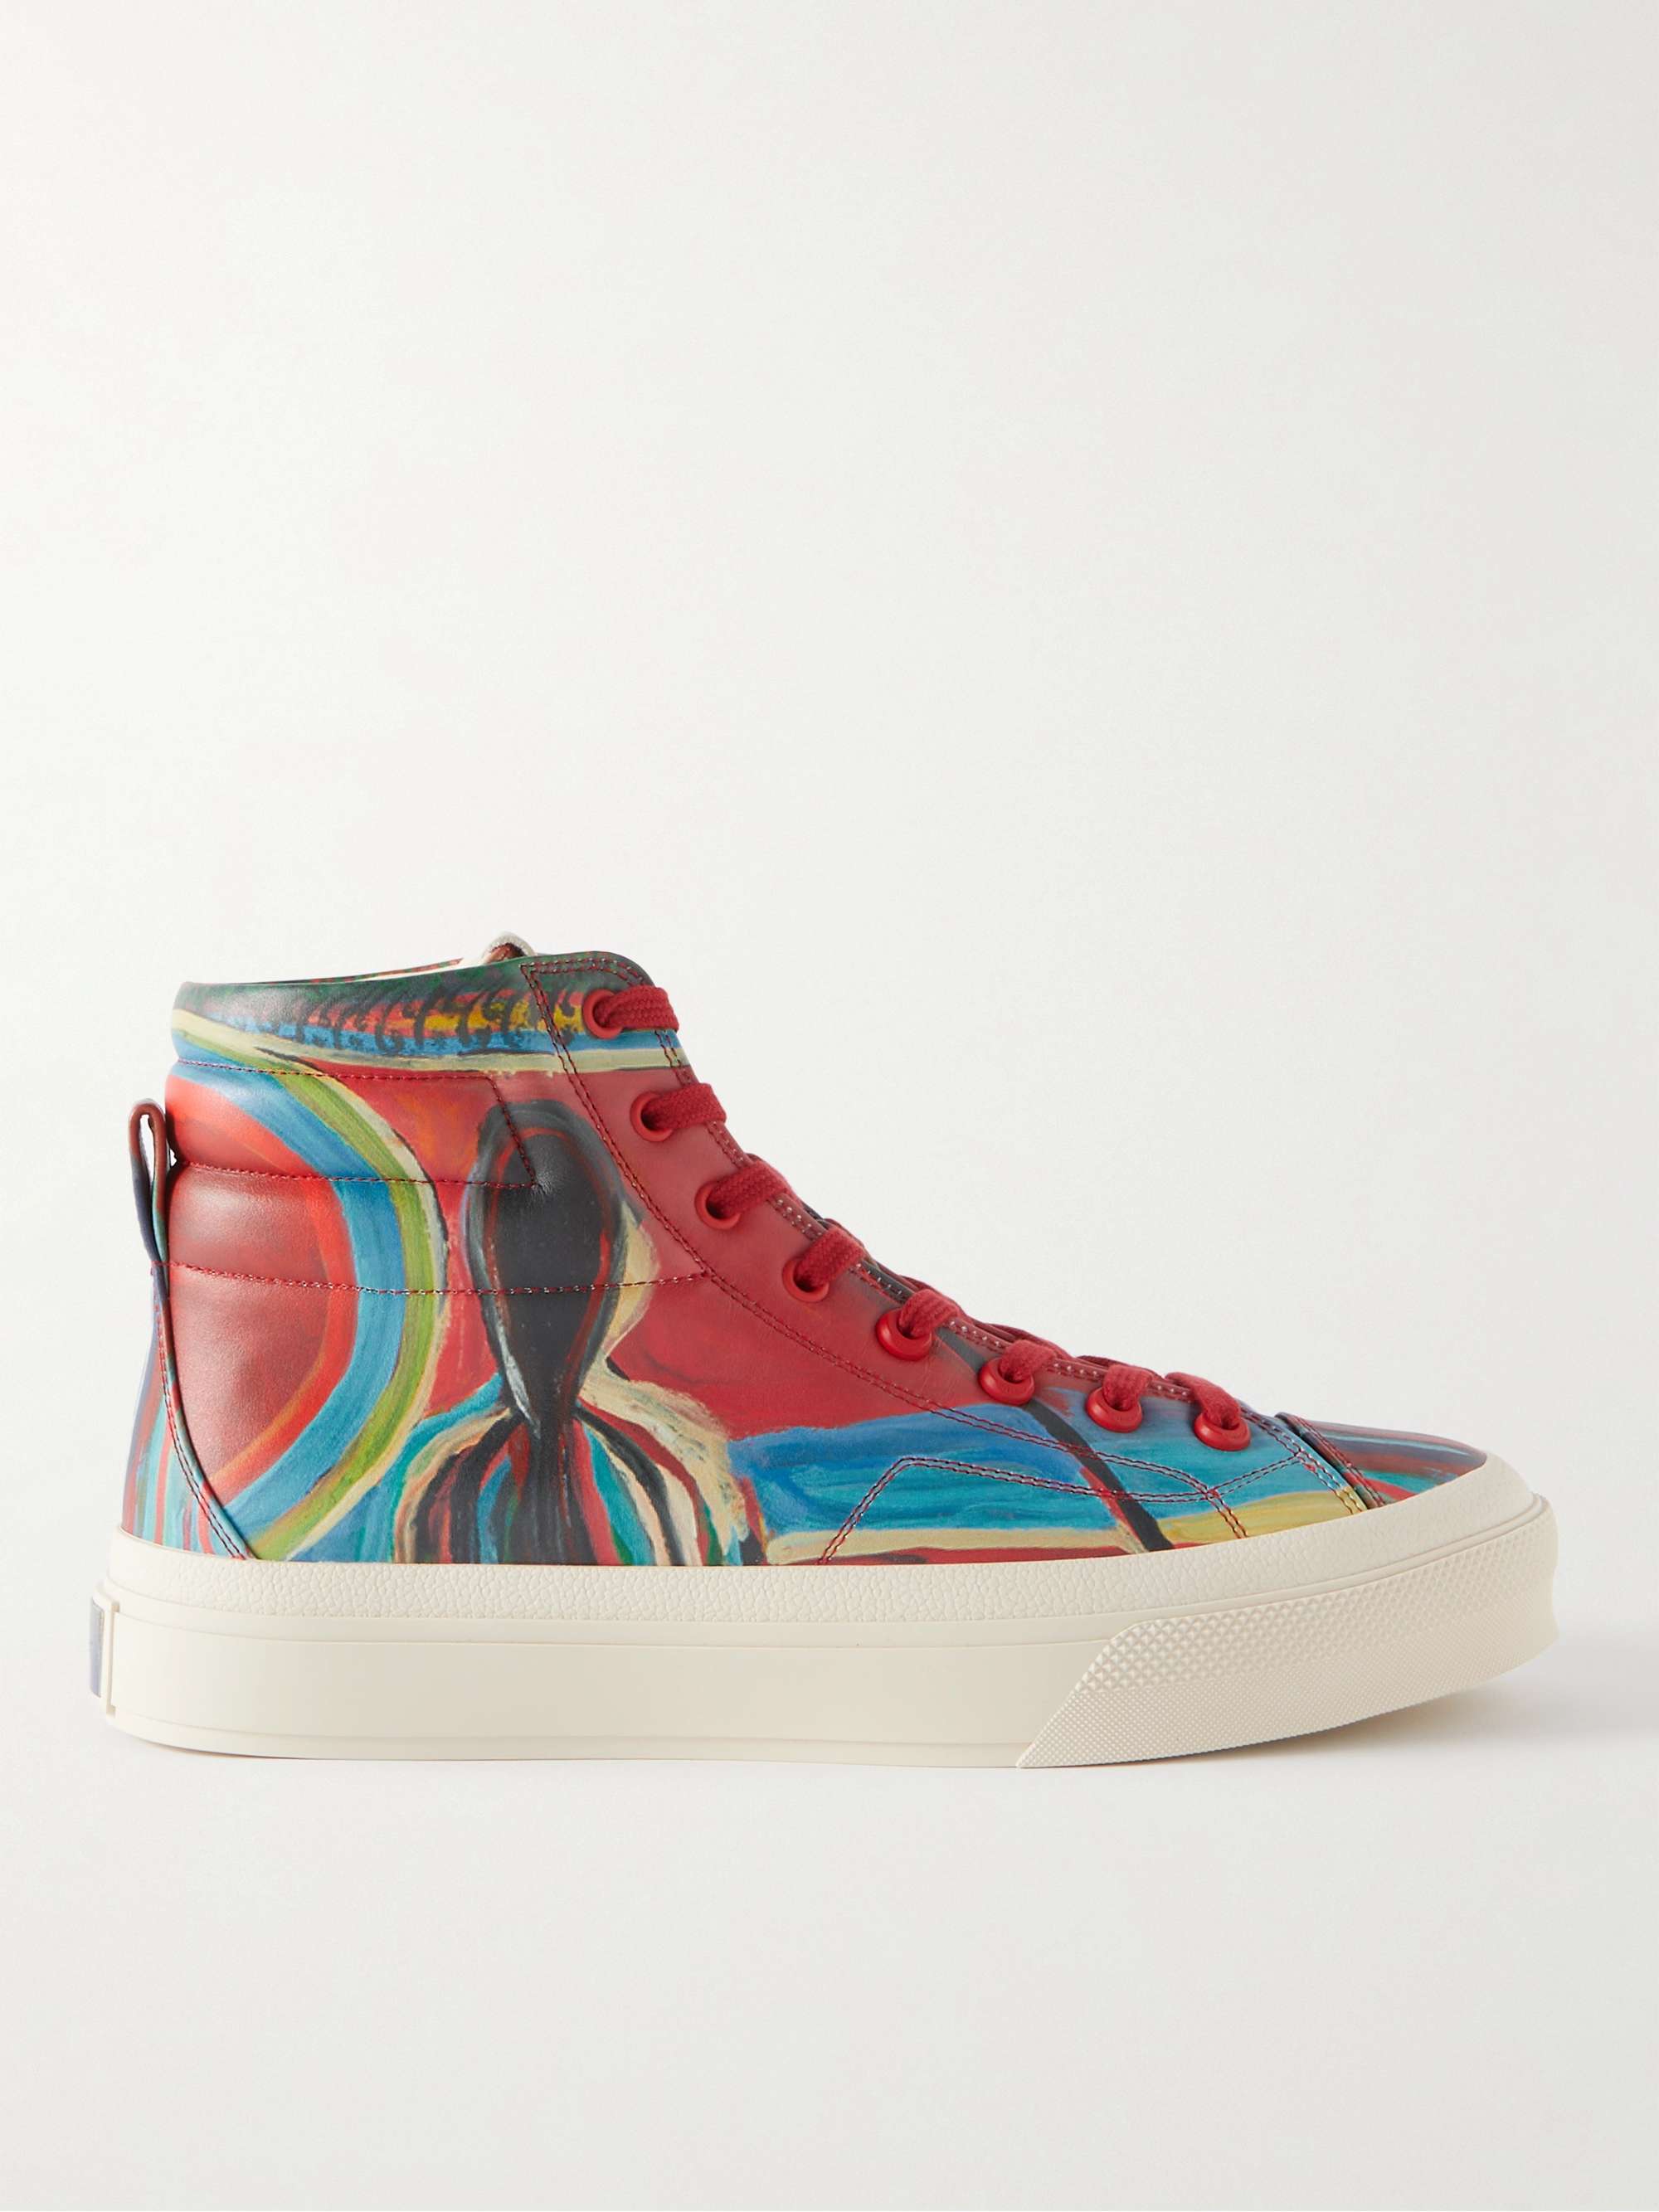 GIVENCHY + Josh Smith Printed Leather High-Top Sneakers | MR PORTER